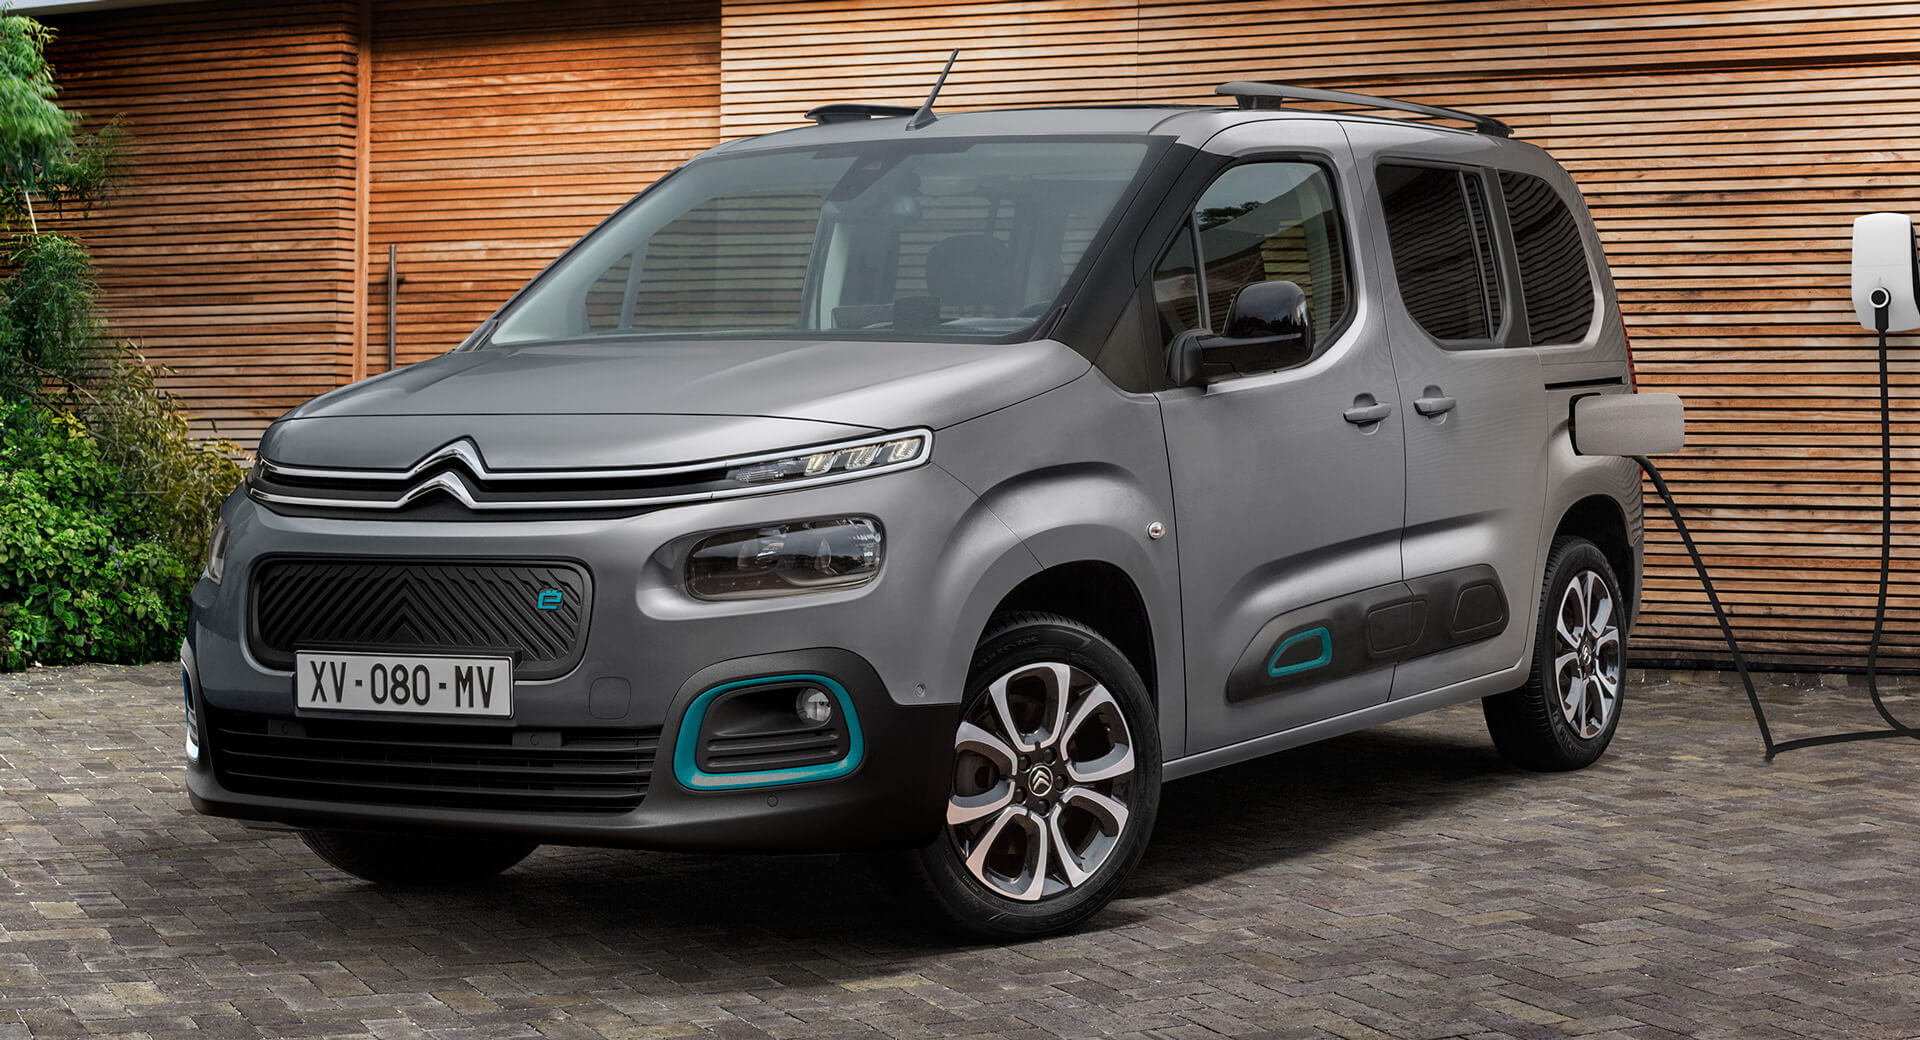 2021 Citroen eBerlingo Electric MPV Launches With Up To 7 Seats, 174